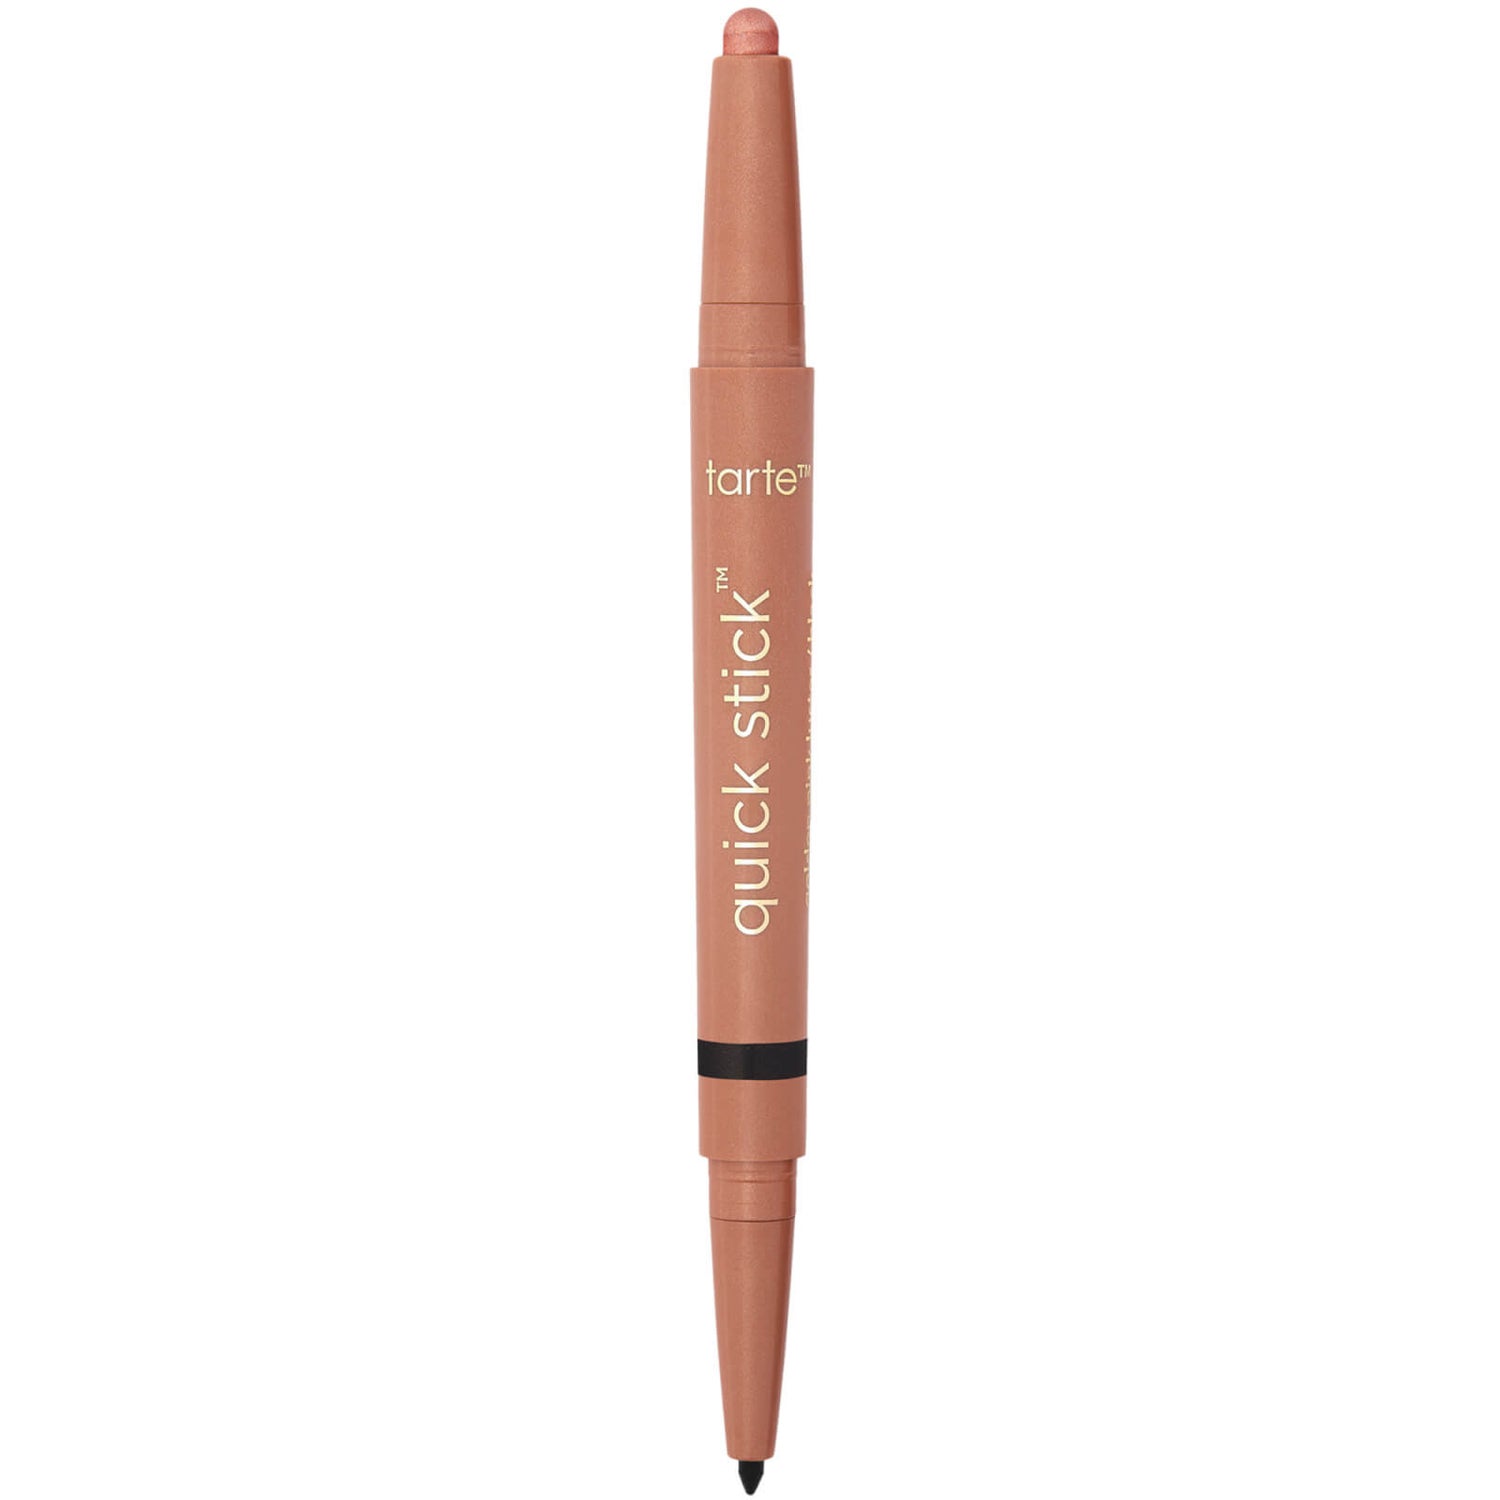 Tarte Quick Stick Waterproof Shadow and Liner 0.8g (Various Shades)